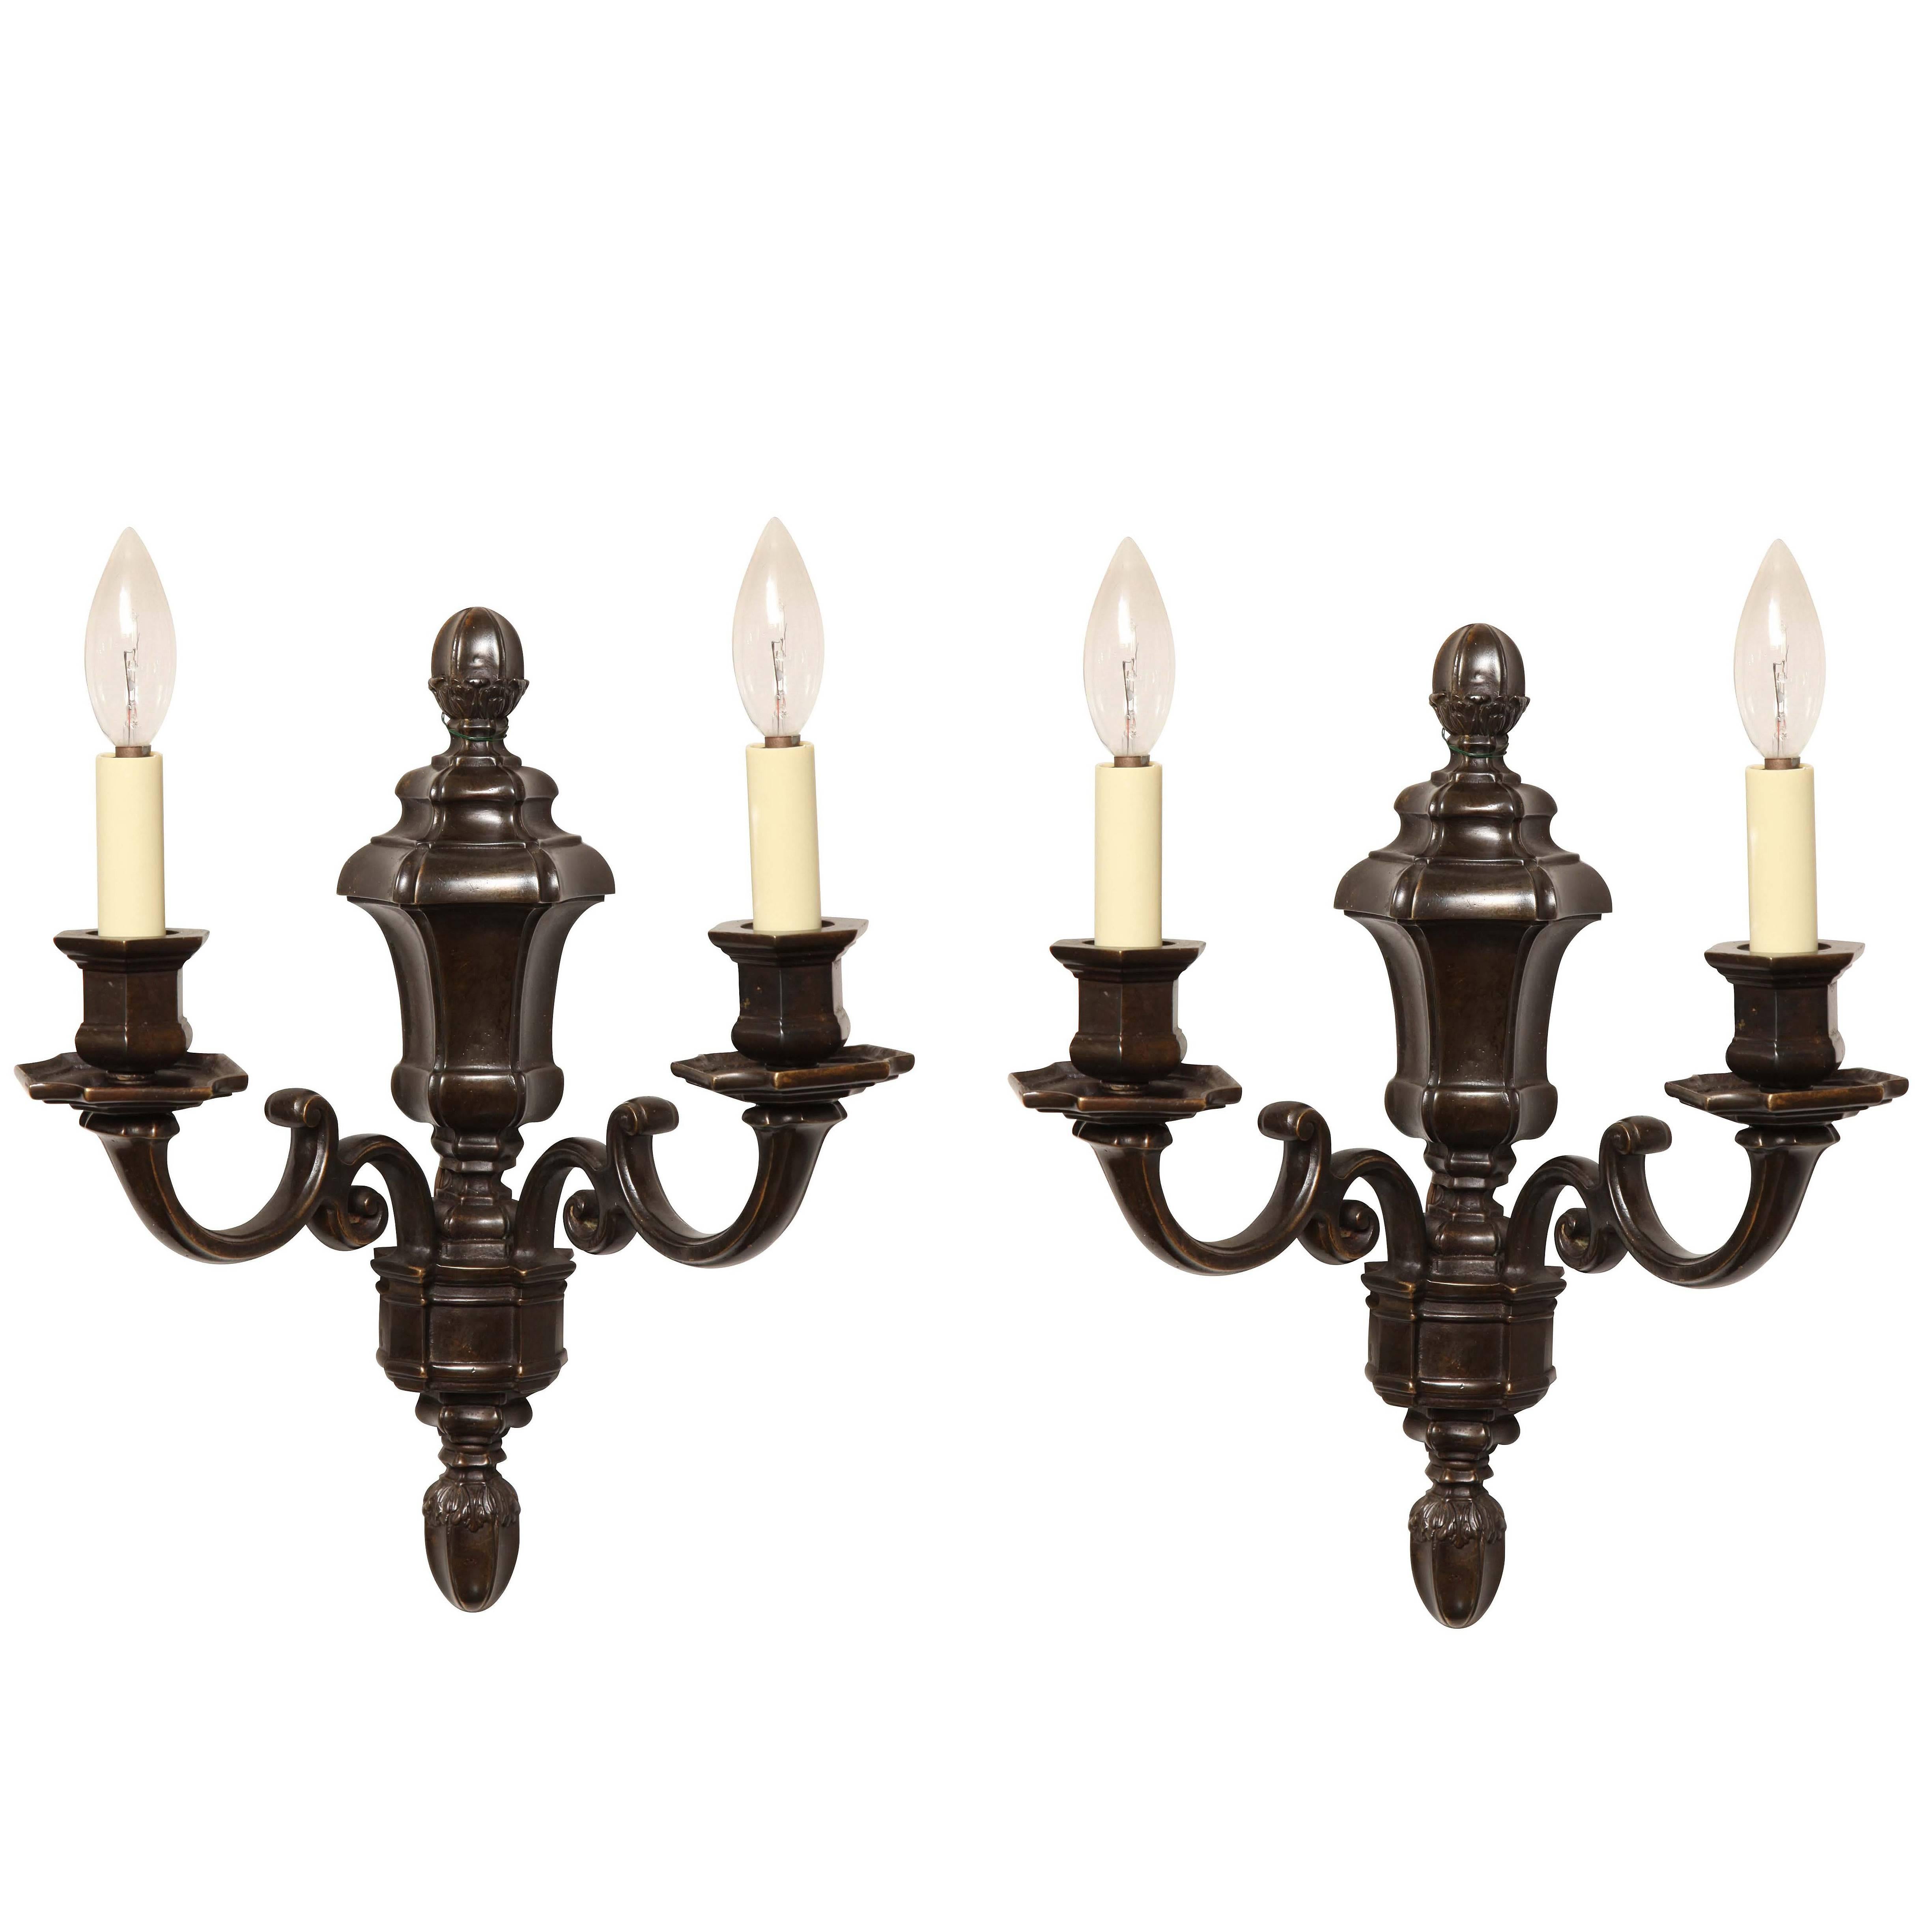 Pair of Patinated Bronze Sconces by E.F. Caldwell, Two Light Sconces